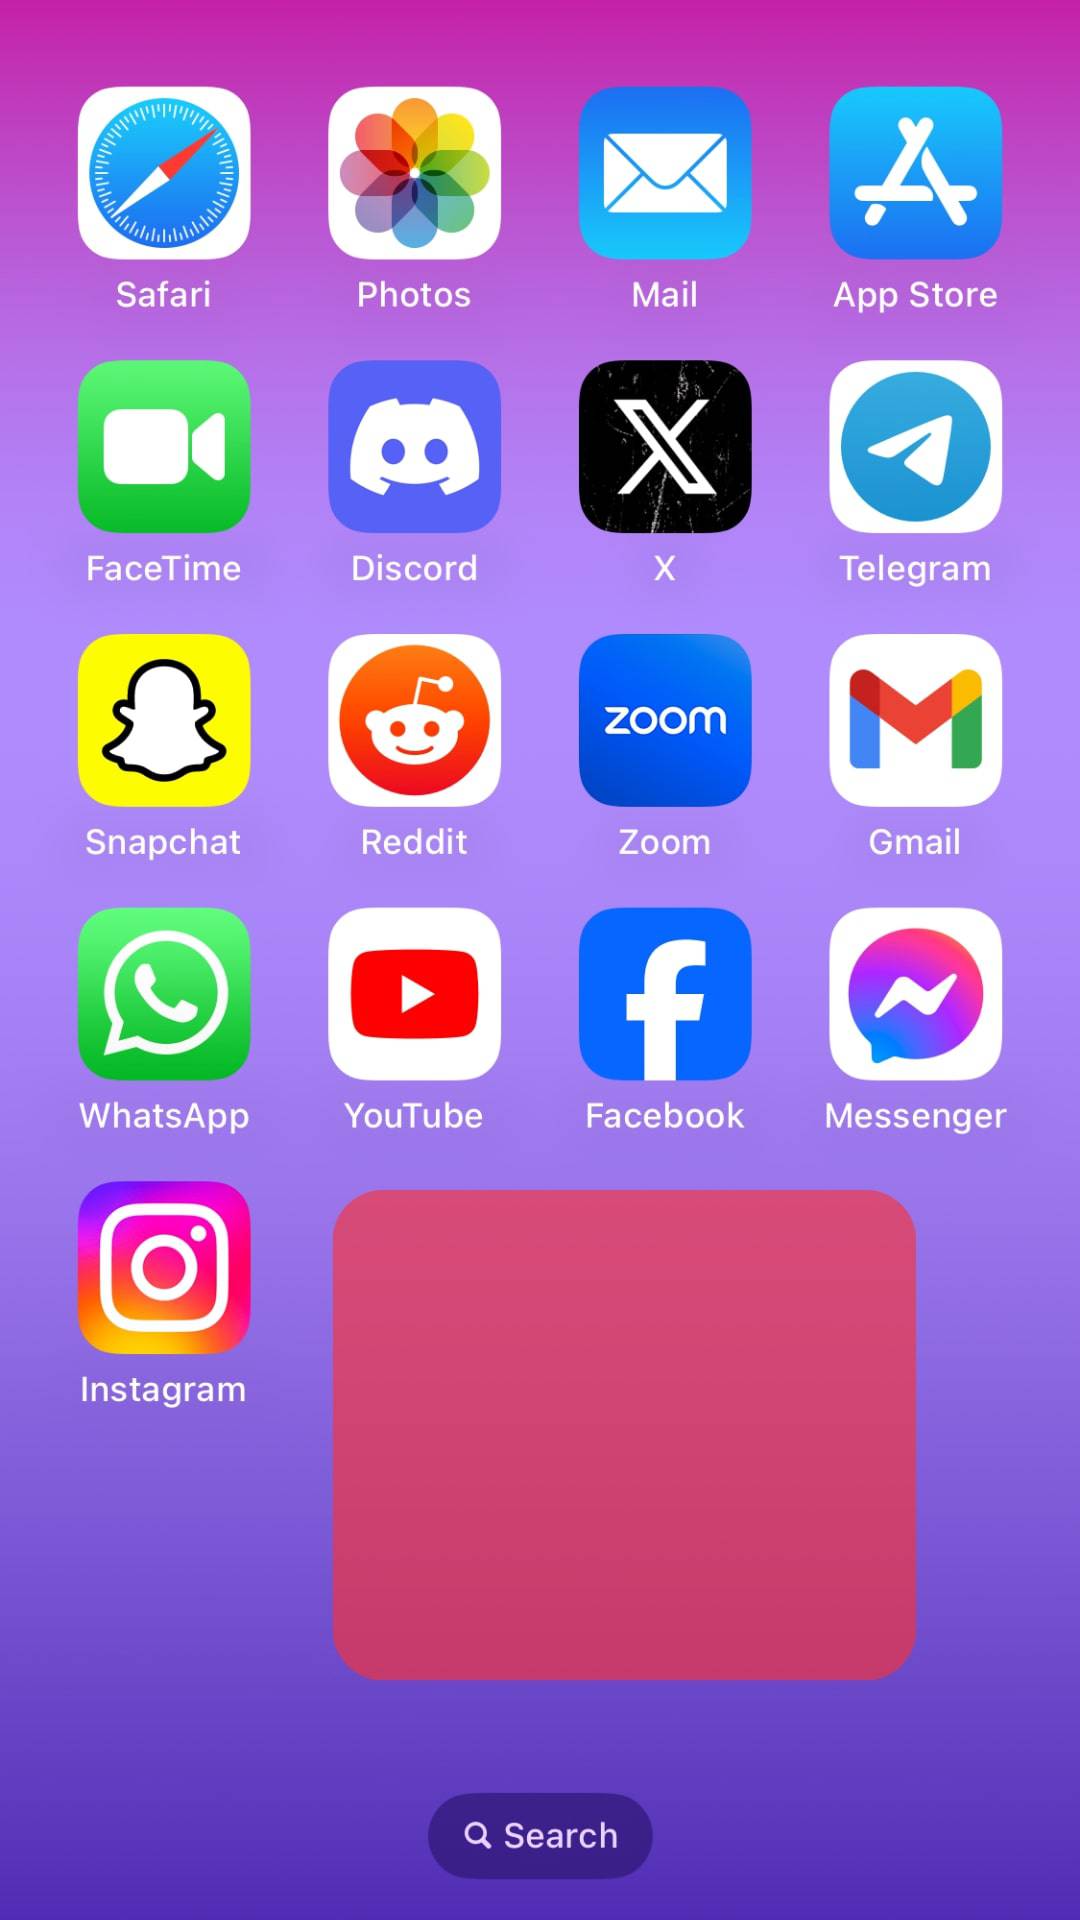 Long-Press The Blank Area On The Home Screen